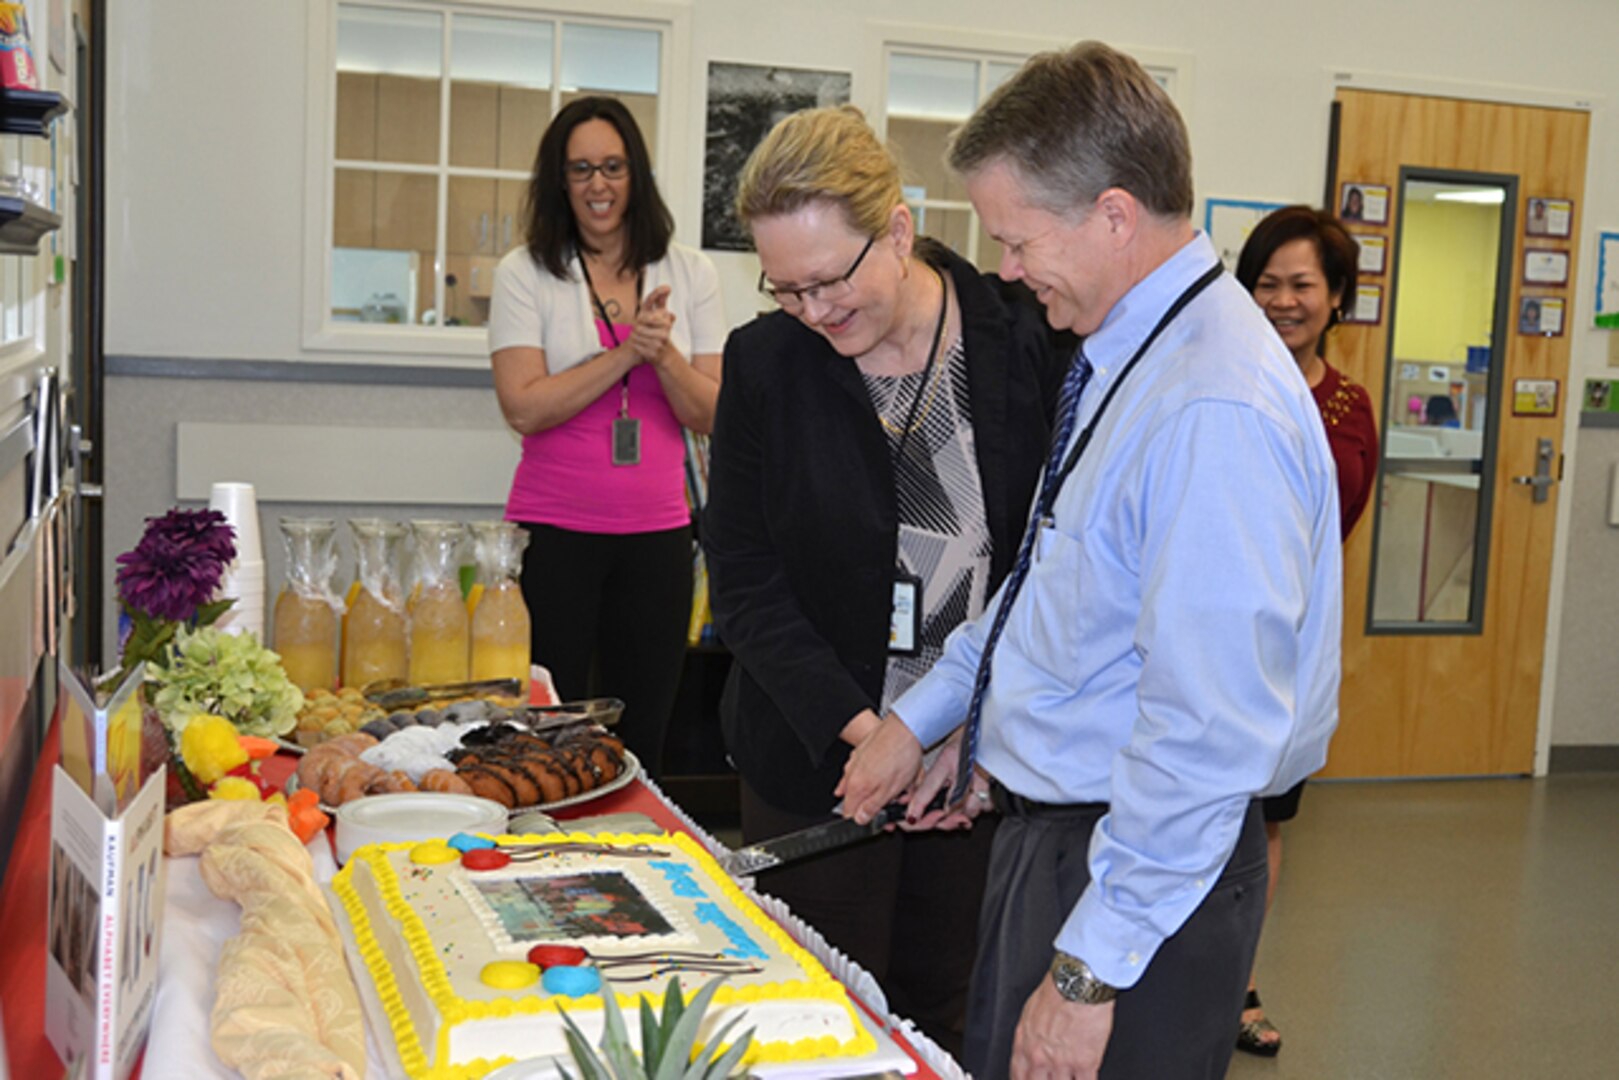 Defense Logistics Agency Installation Support at Richmond held a ceremony, April 3, 2017, for the reopening of the Bettye Akermann Cobb Child Development Center on Defense Supply Center Richmond, Virginia. In celebration David Gibson, right, director of DLA Installation Support at Richmond, and the DLA Installation Support's Director Denise Miller, center, cut the cake as CCD Director Casey Chapman, back left, and Family Morale and Wellness Director Ursula Hickox, back right, share in the celebration. 